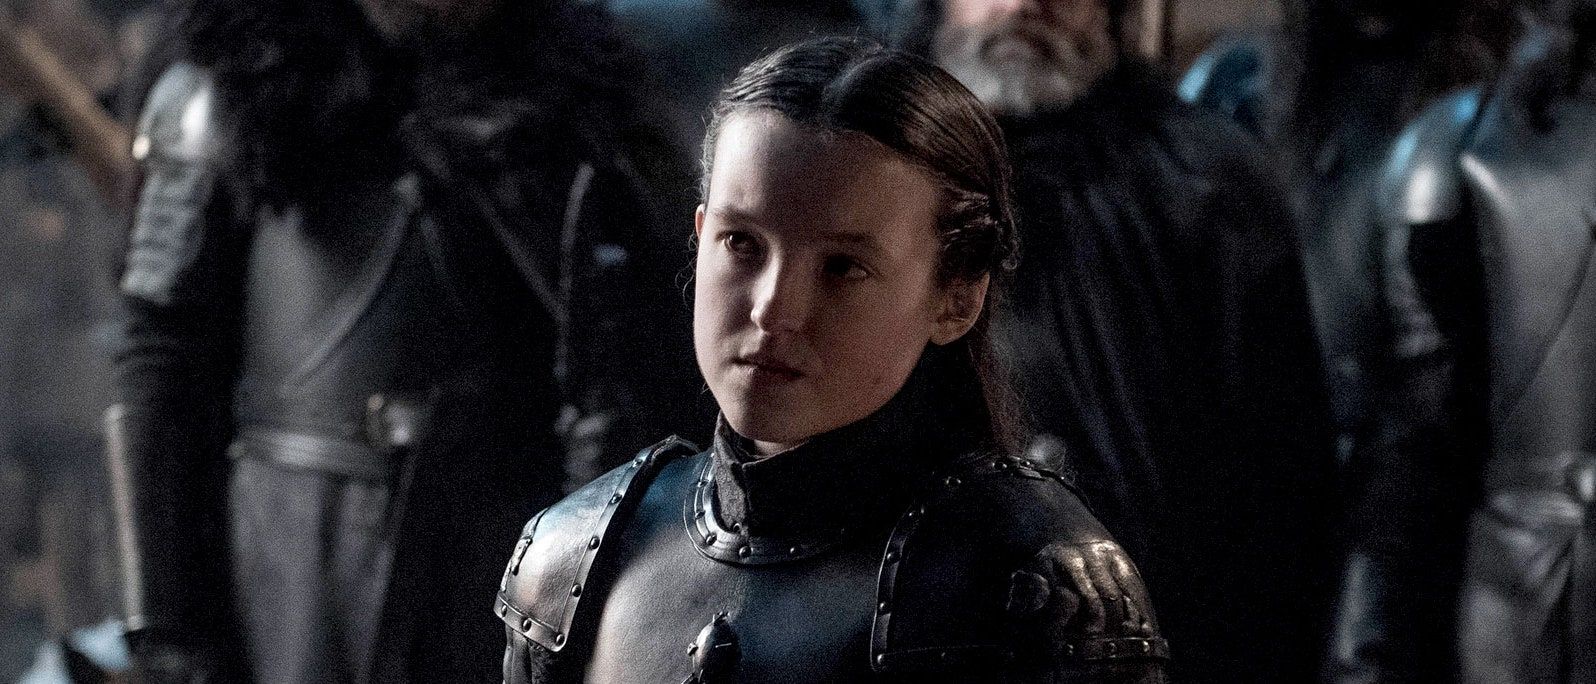 Game of Thrones: Episode 2 Photo Show Lyanna Mormont in Her Own Armor